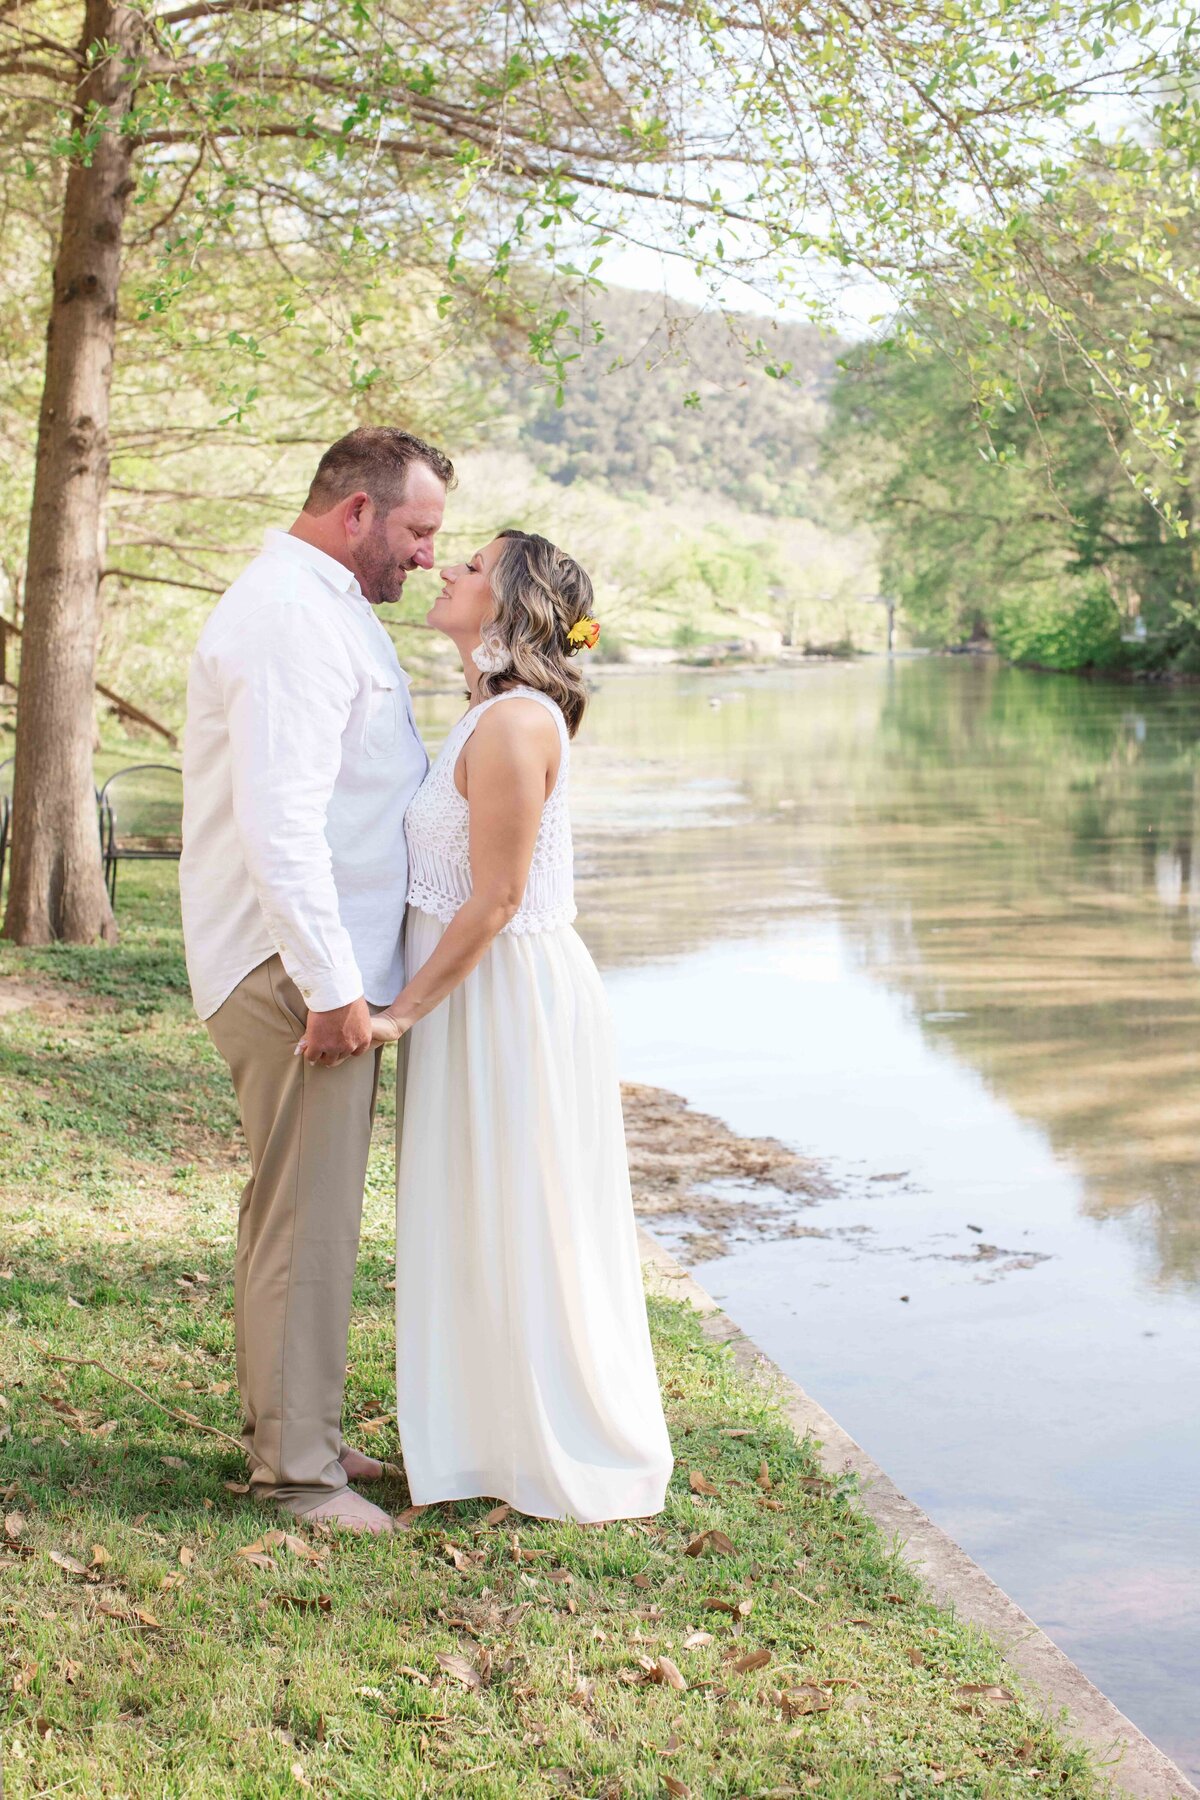 boho wedding dress at Guadalupe River by New Braunfels wedding photographer Firefly Photography